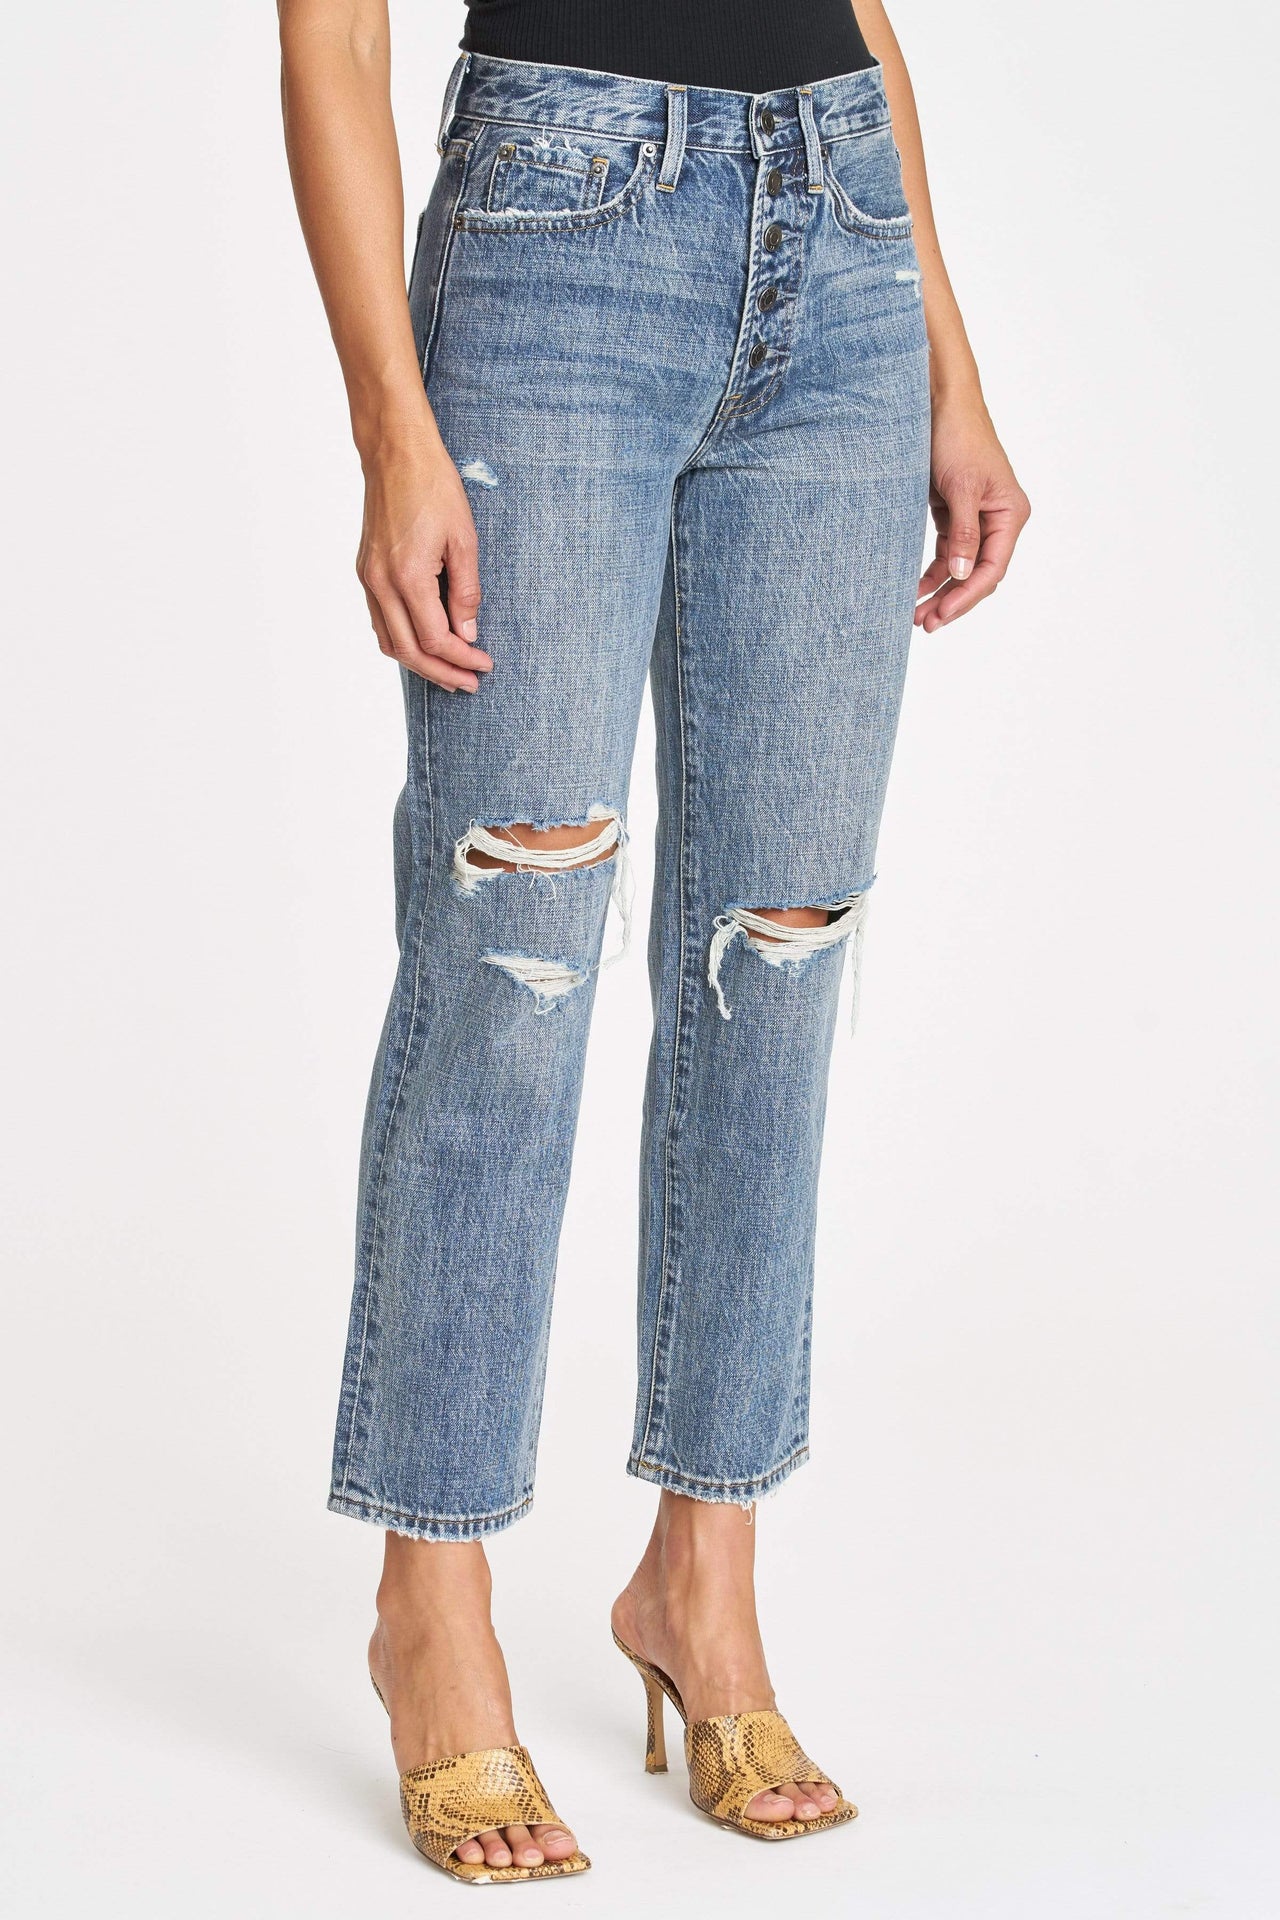 Charlie Pulse Exposed Button Fly Destructed High Rise Straight Leg, Denim by Pistola | LIT Boutique